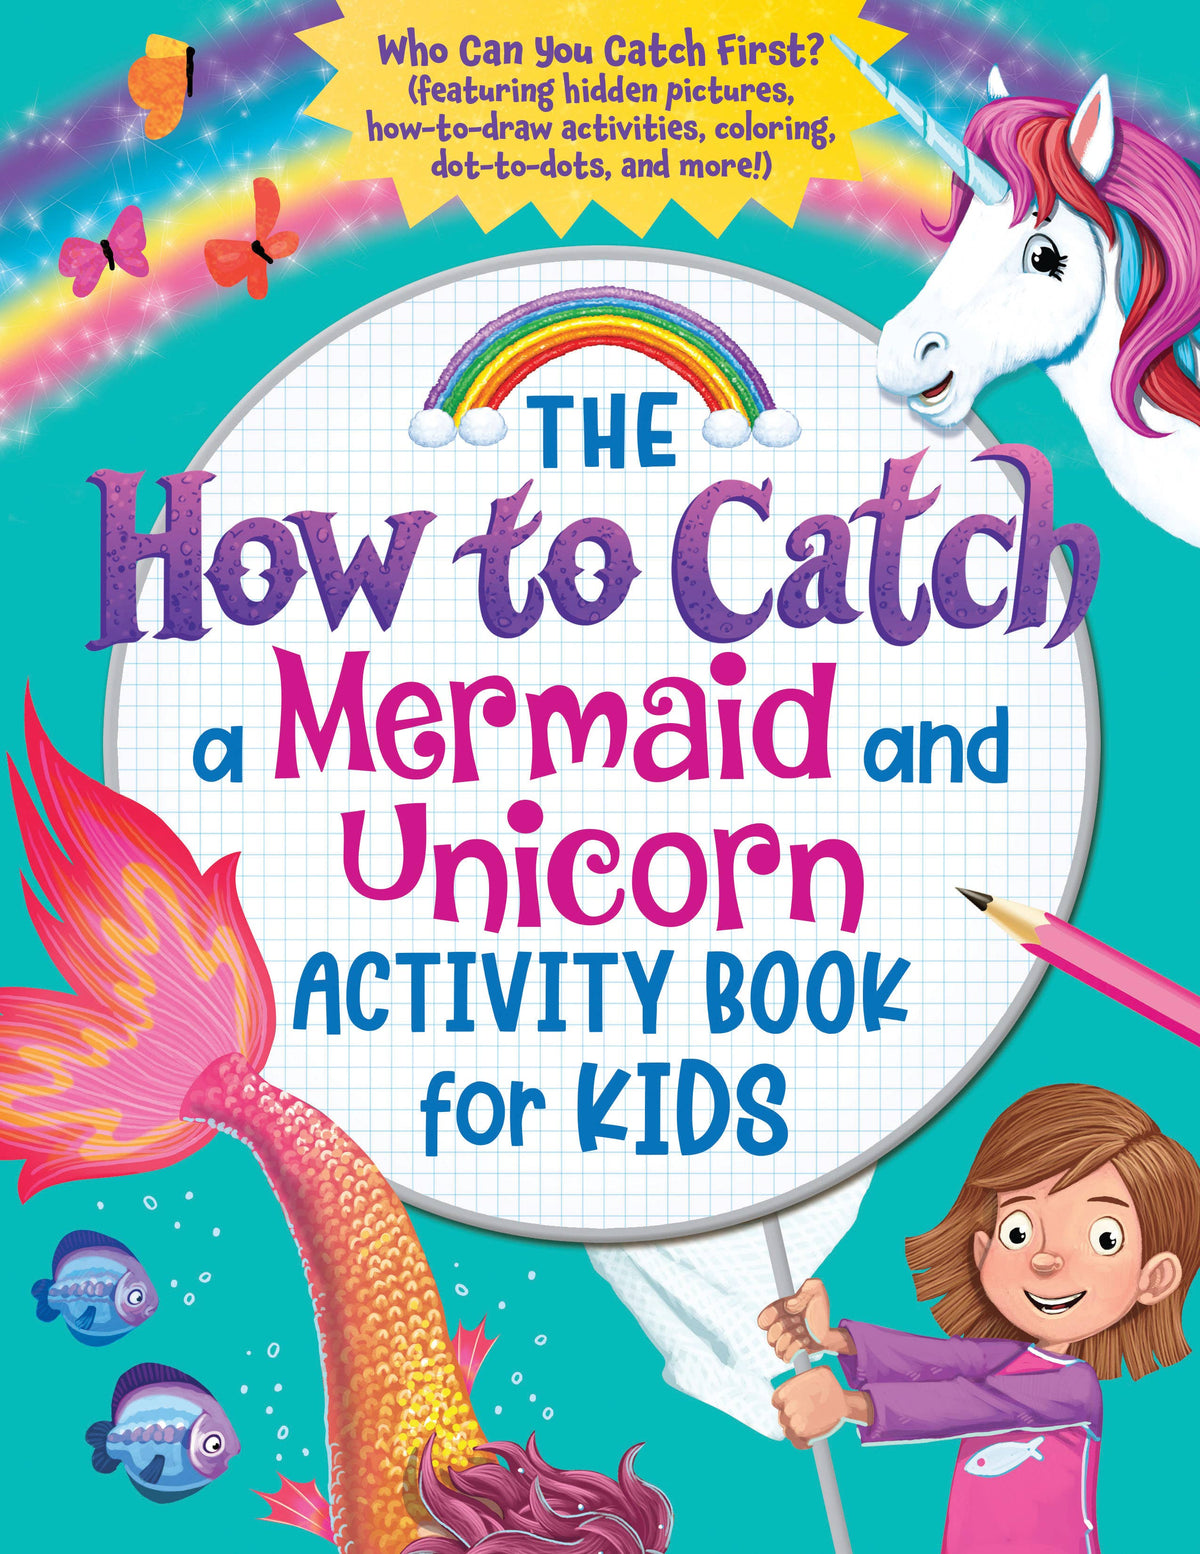 How to Catch a Mermaid and Unicorn Activity Book for Kids*